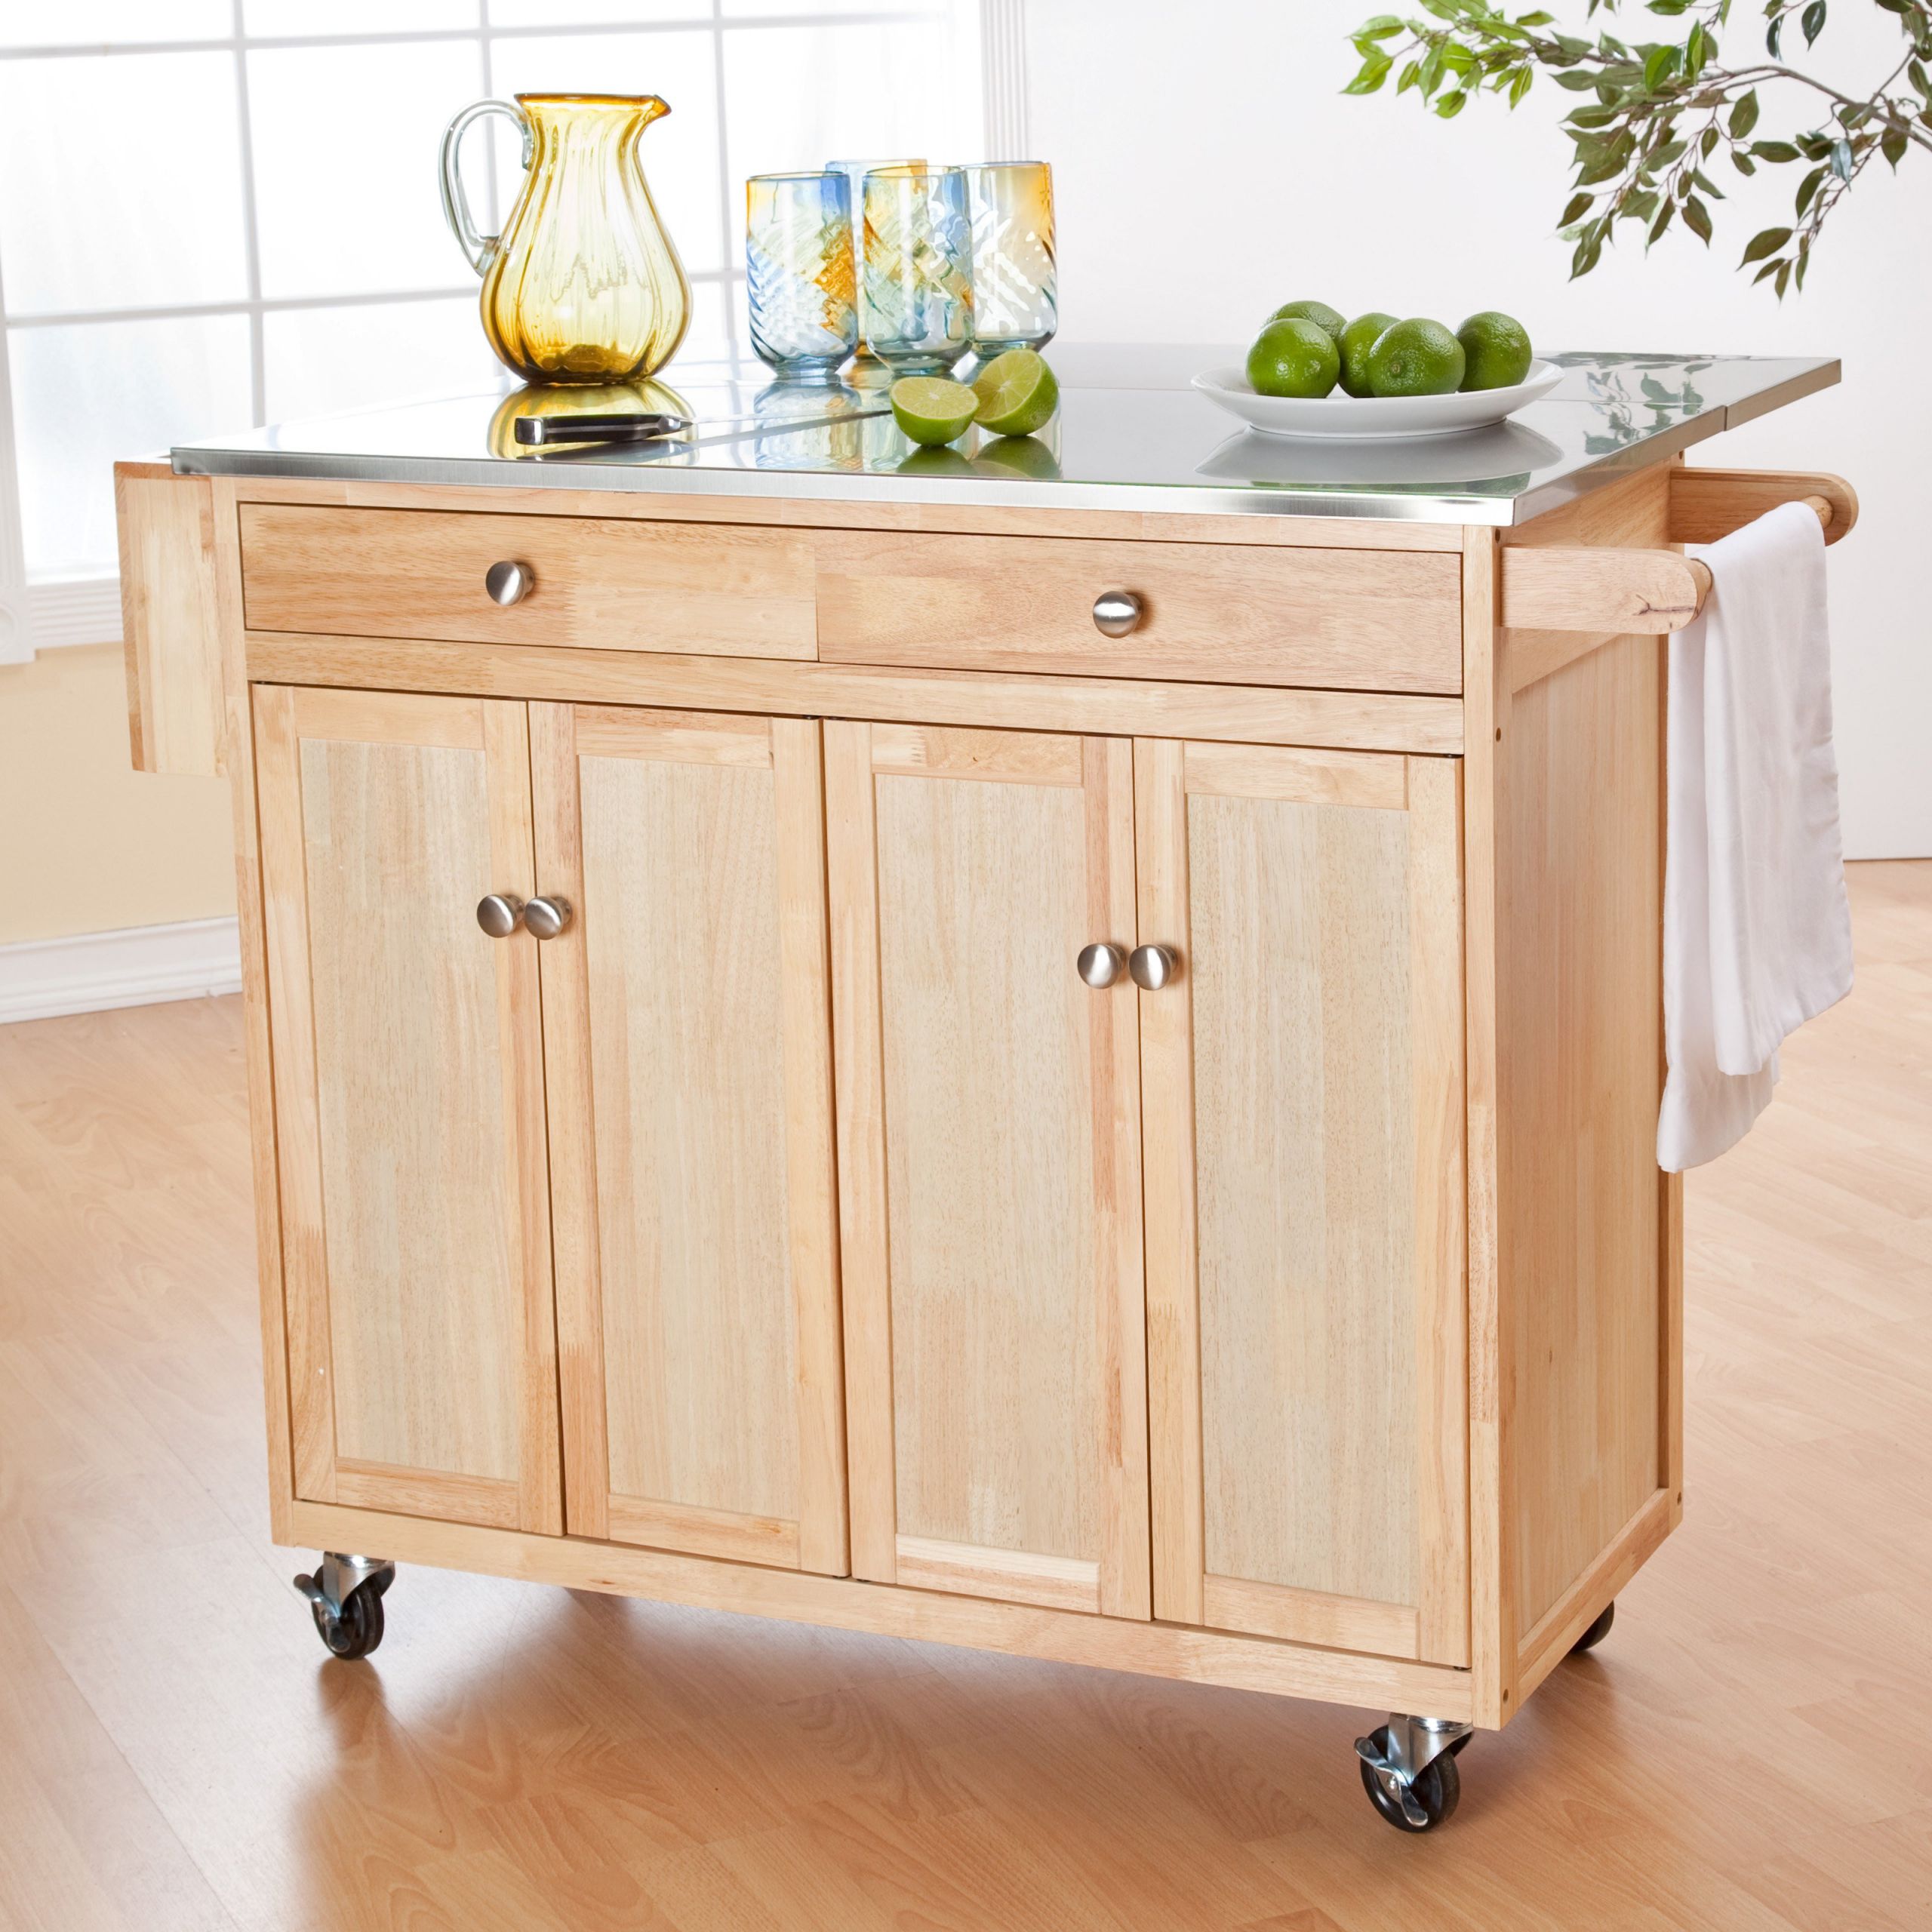 Small Mobile Kitchen Island
 Belham Living Milano Portable Kitchen Island with Optional